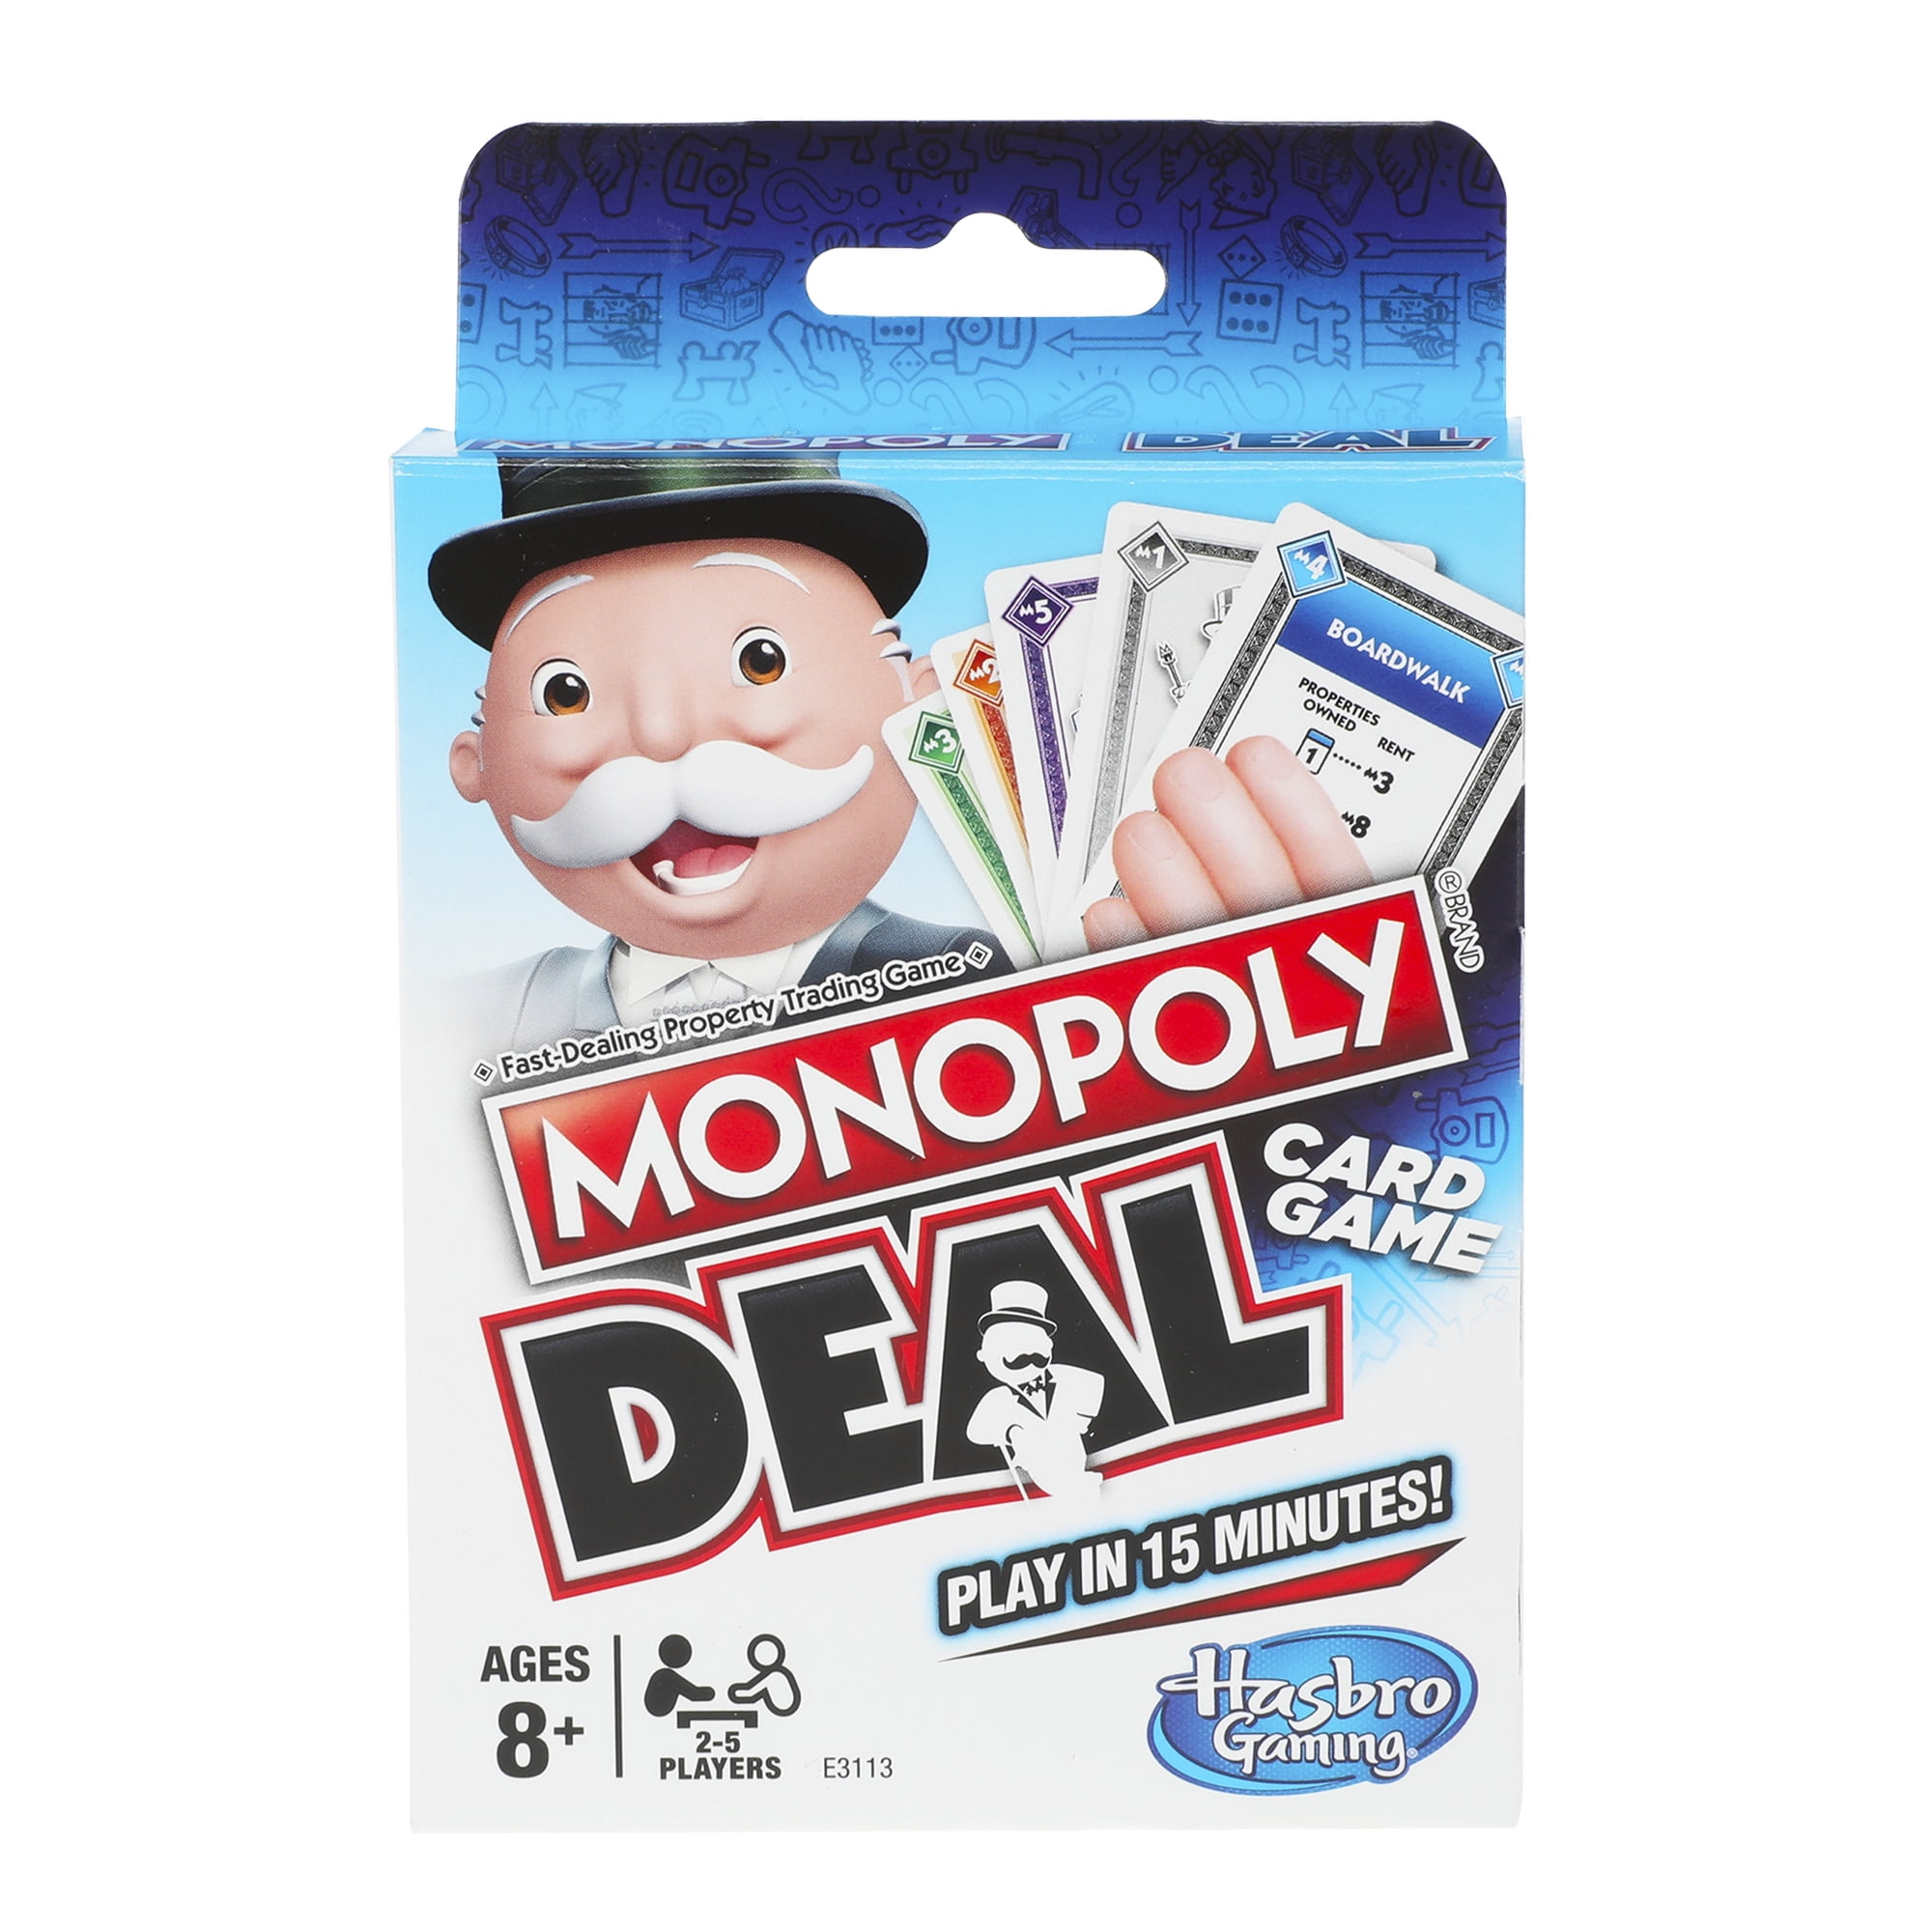 Monopoly Deal Card Game 8 2-5 Players 2008 Hasbro for sale online